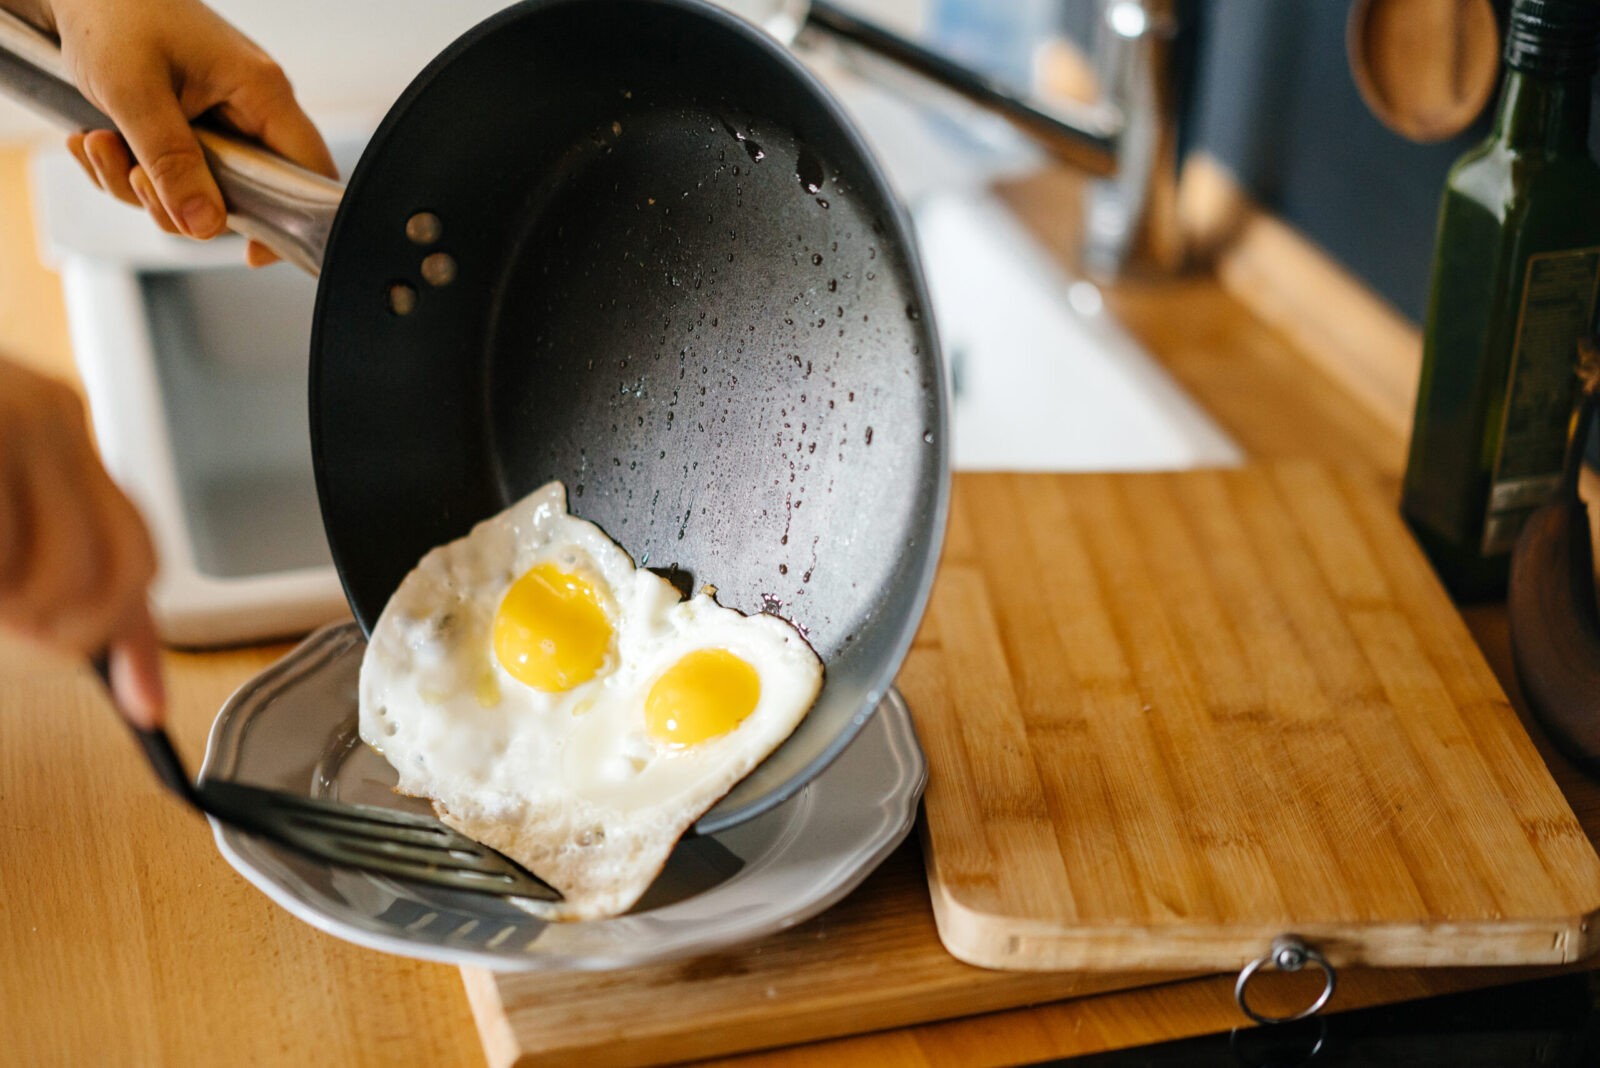 eggs sunnyside up in a non-stick pan, which may have PFAS chemicals